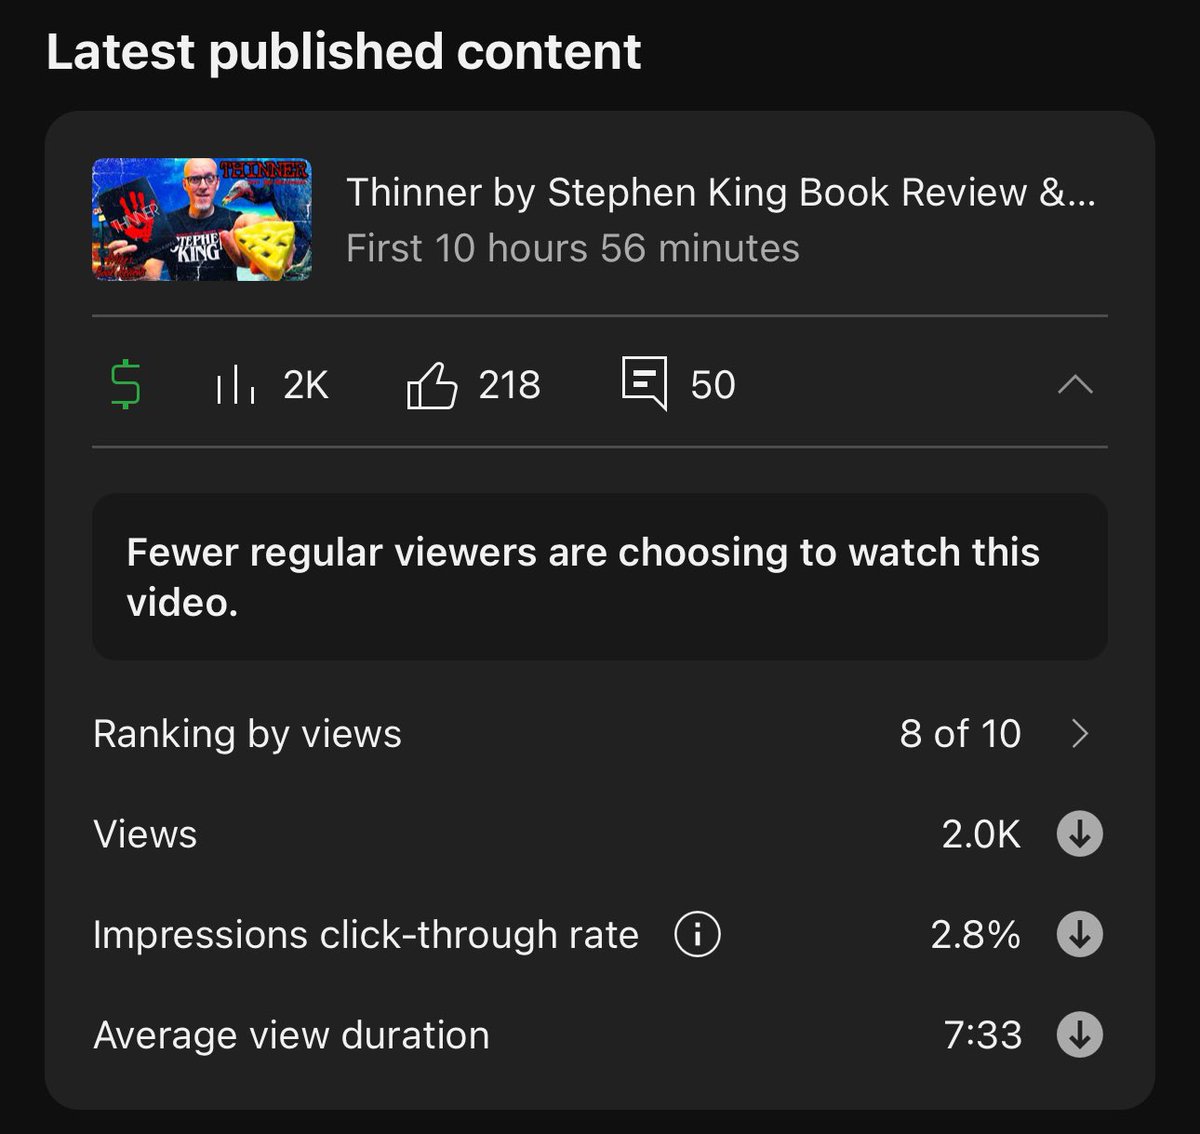 *sigh* Sure wish I could get viewers interest in my Stephen King content.